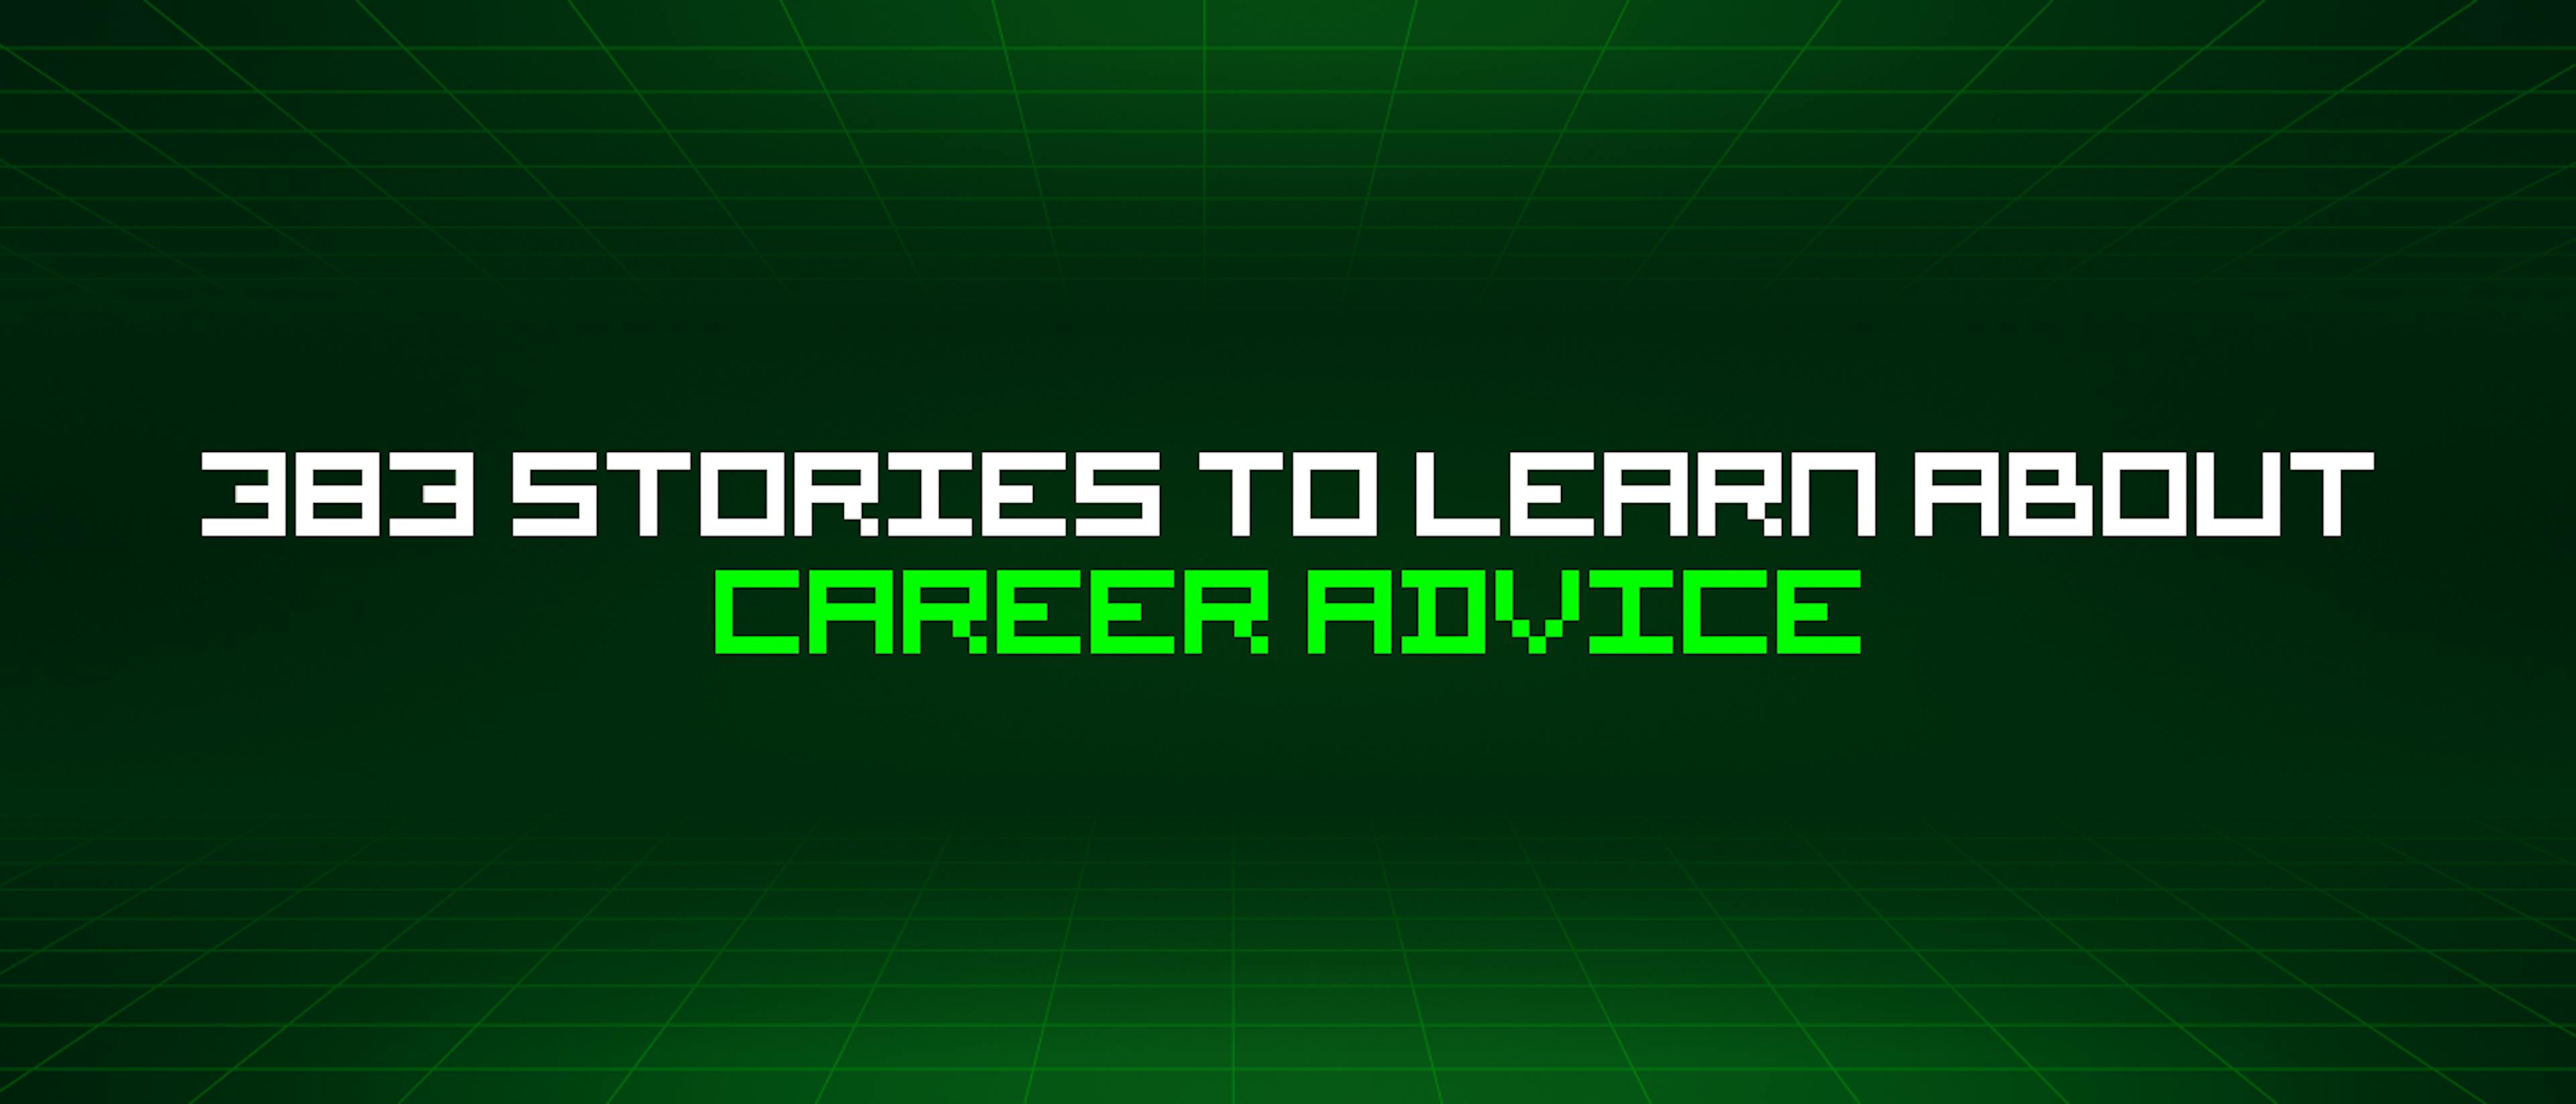 featured image - 383 Stories To Learn About Career Advice